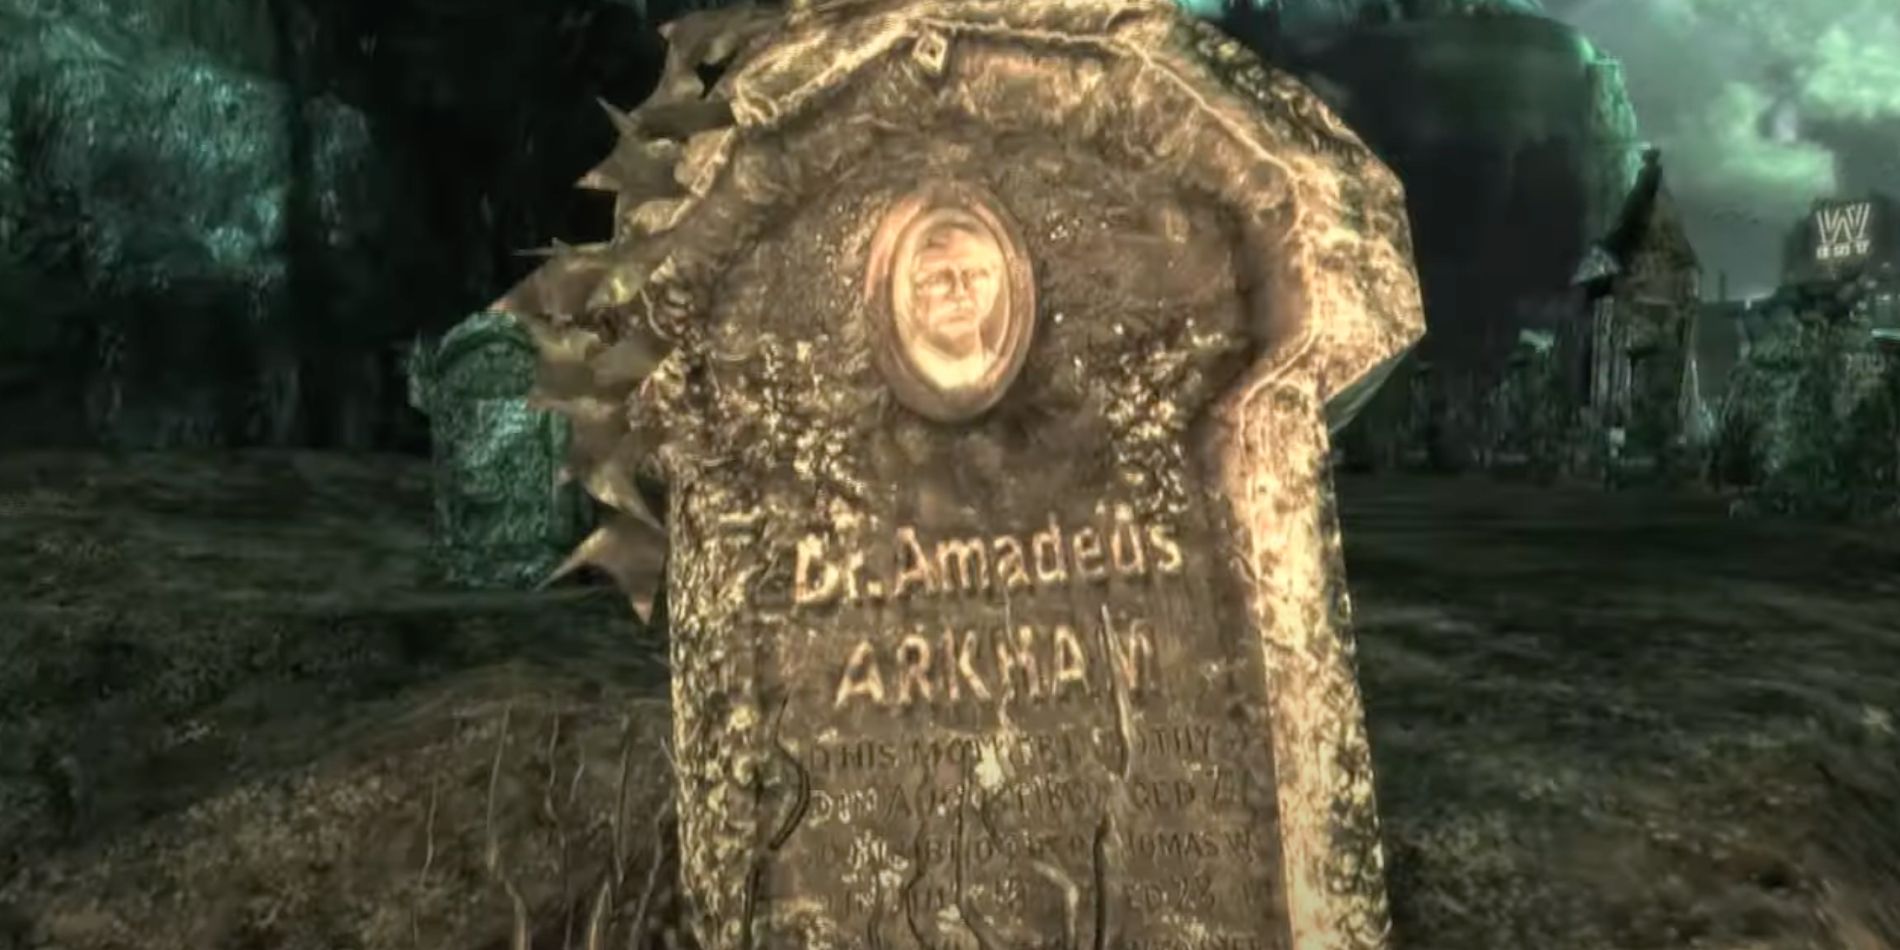 How Batman Arkham Asylum's Founder Ended Up Its Second Inmate Arkham's Grave